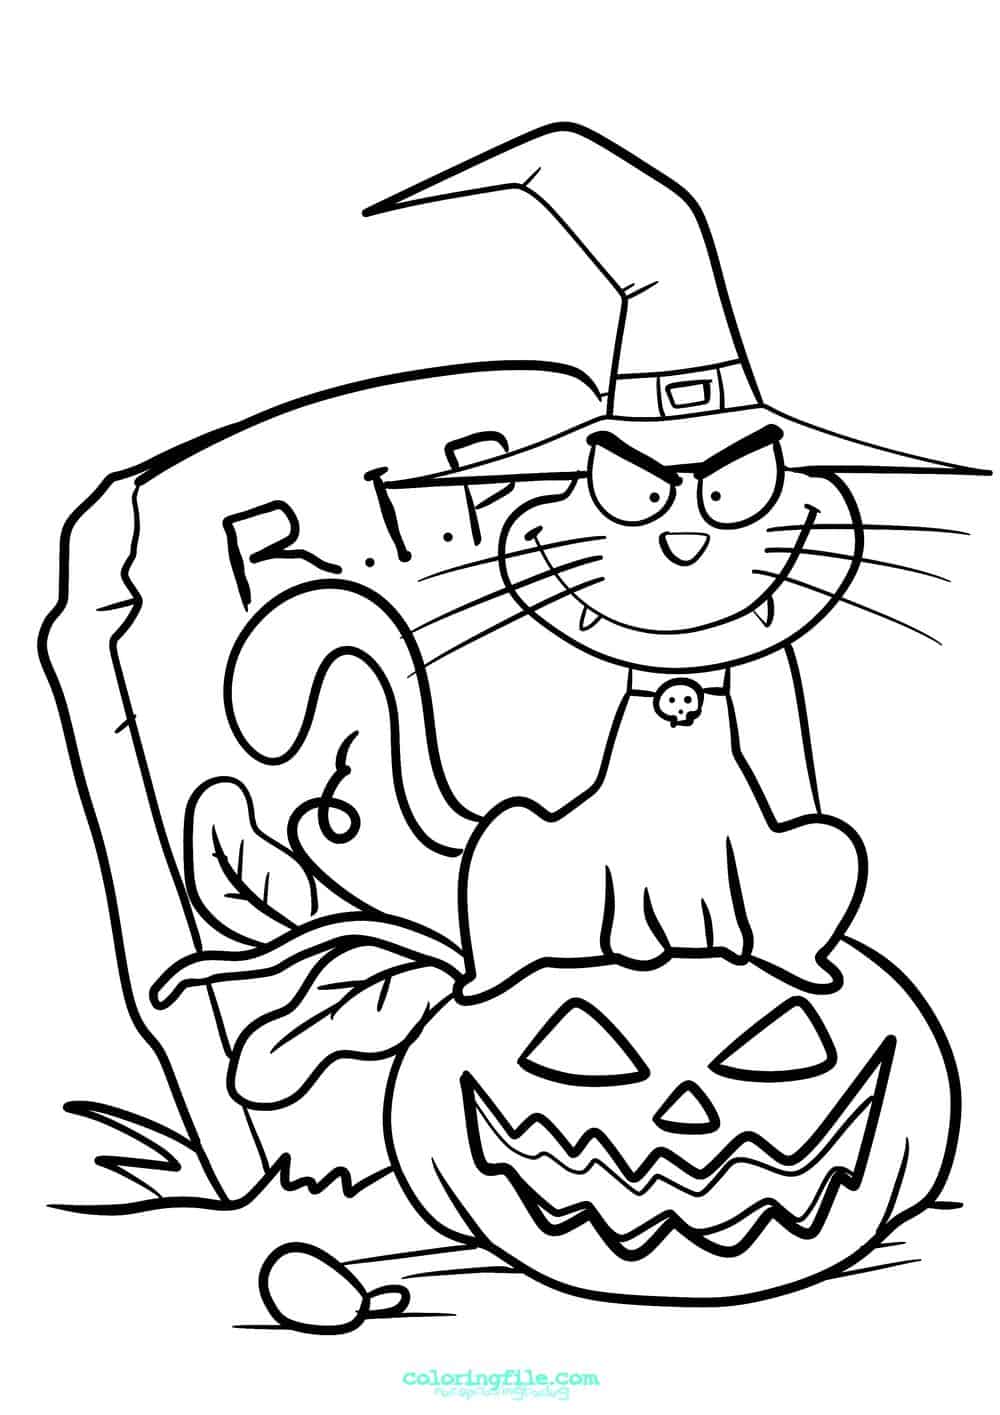 Halloween cat and pumpkin on a grave coloring pages